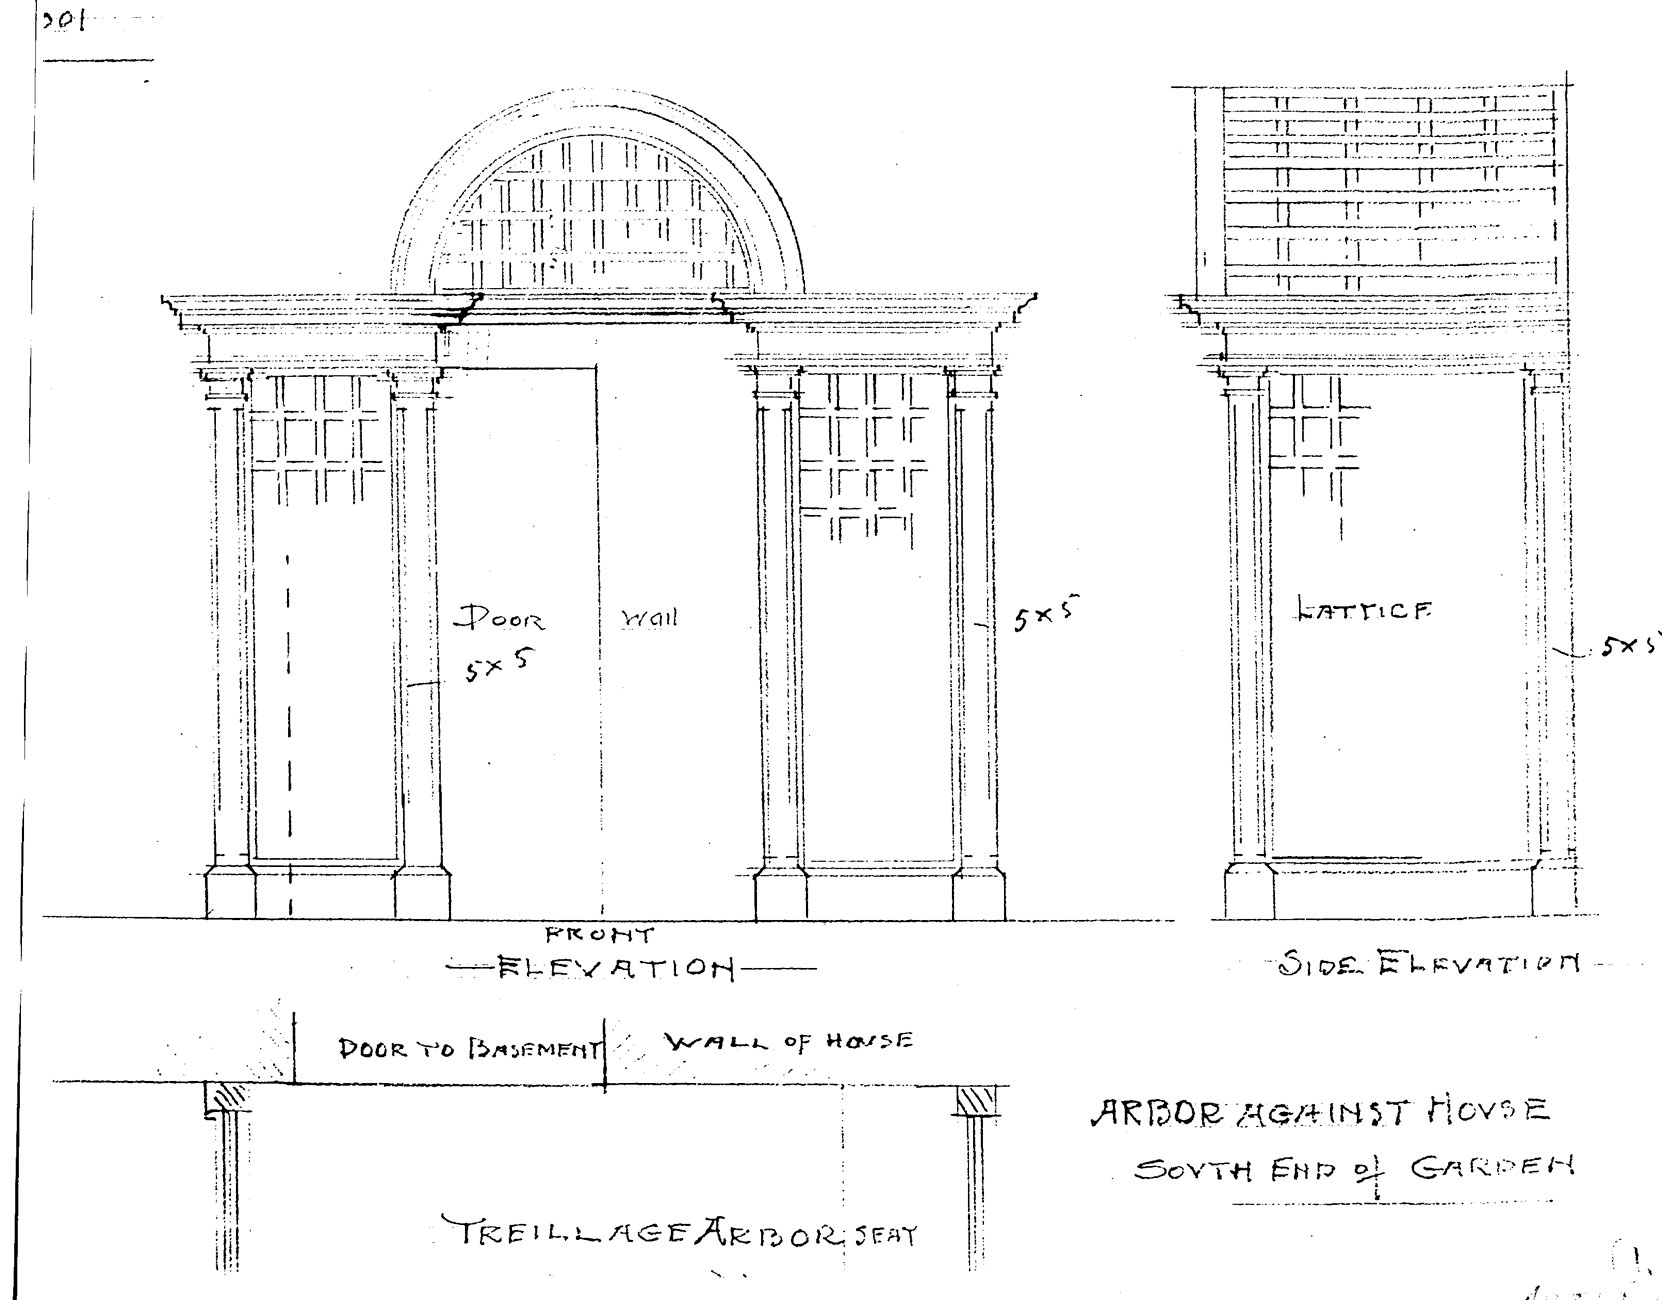 Samuel Maclure design for "Arbor Against House" for the Italian Garden, 1925 (courtesy of UVic Library - Special Collections)